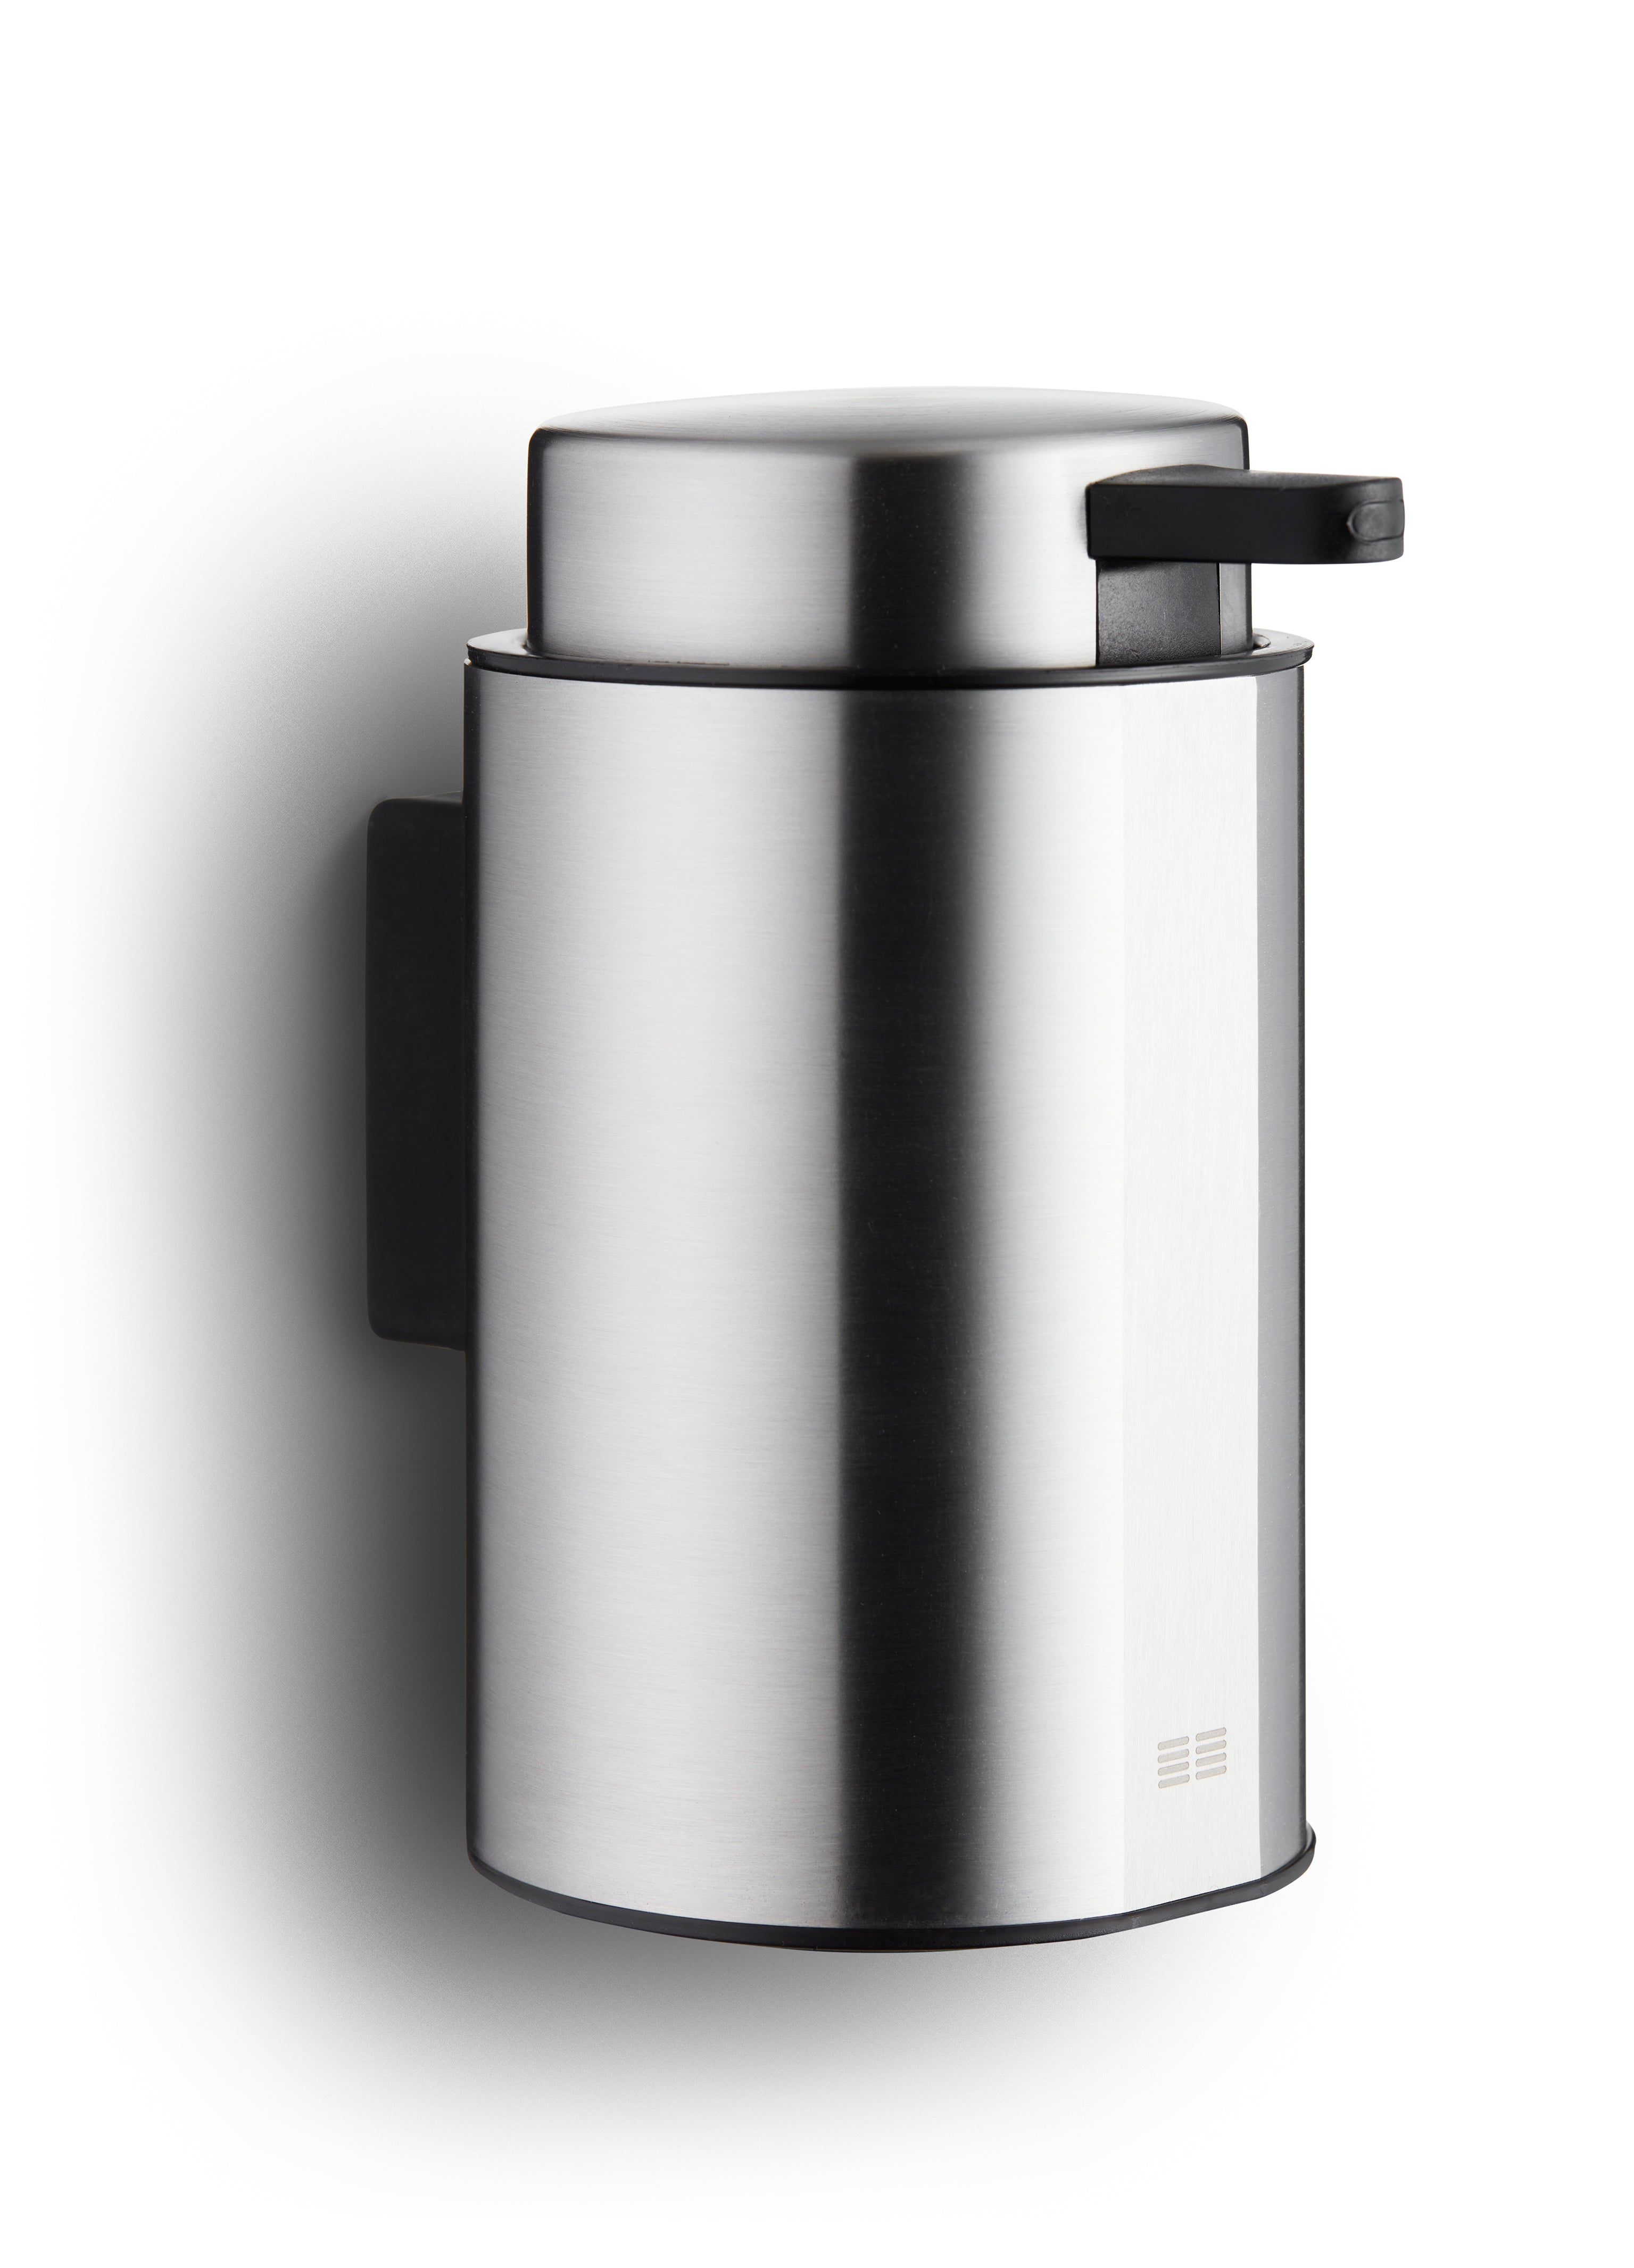 Unidrain Reframe wall soap dispenser - brushed stainless steel